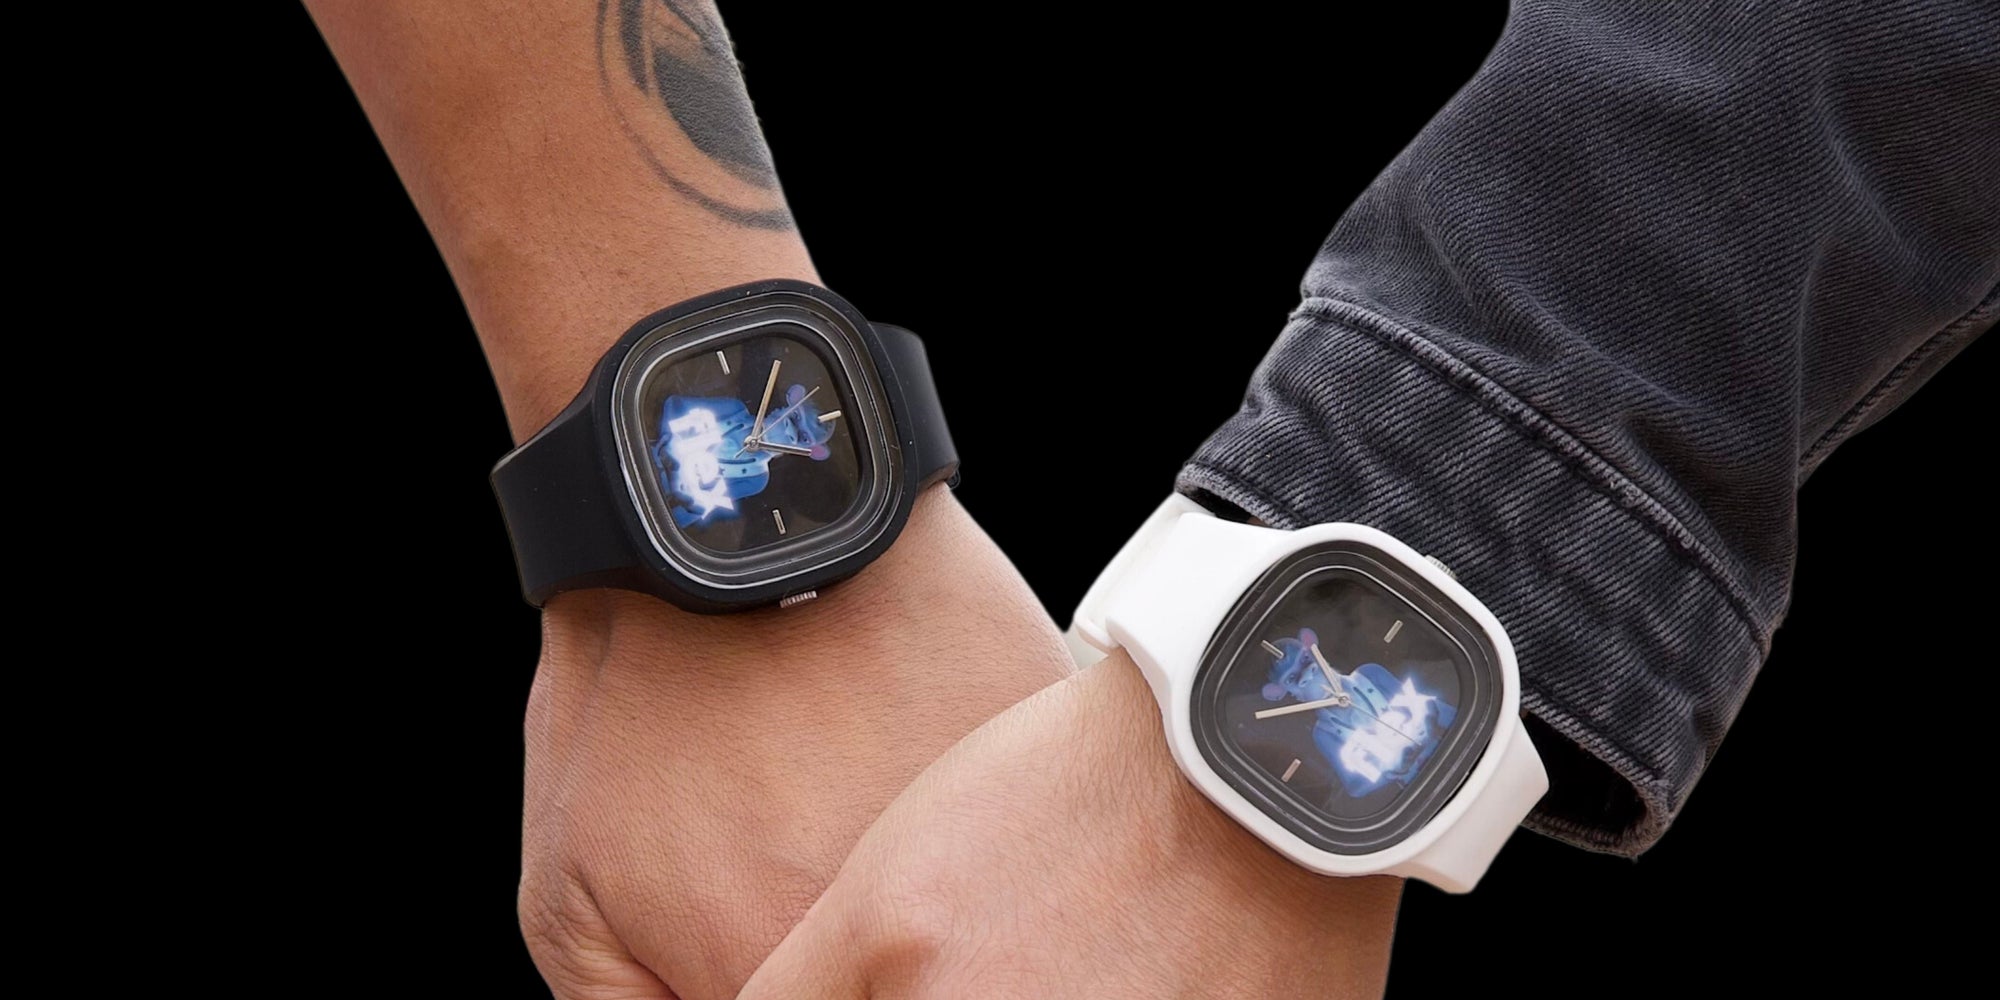 Introducing the JIMBO Flex Watch: Wearable Art That Makes a Difference